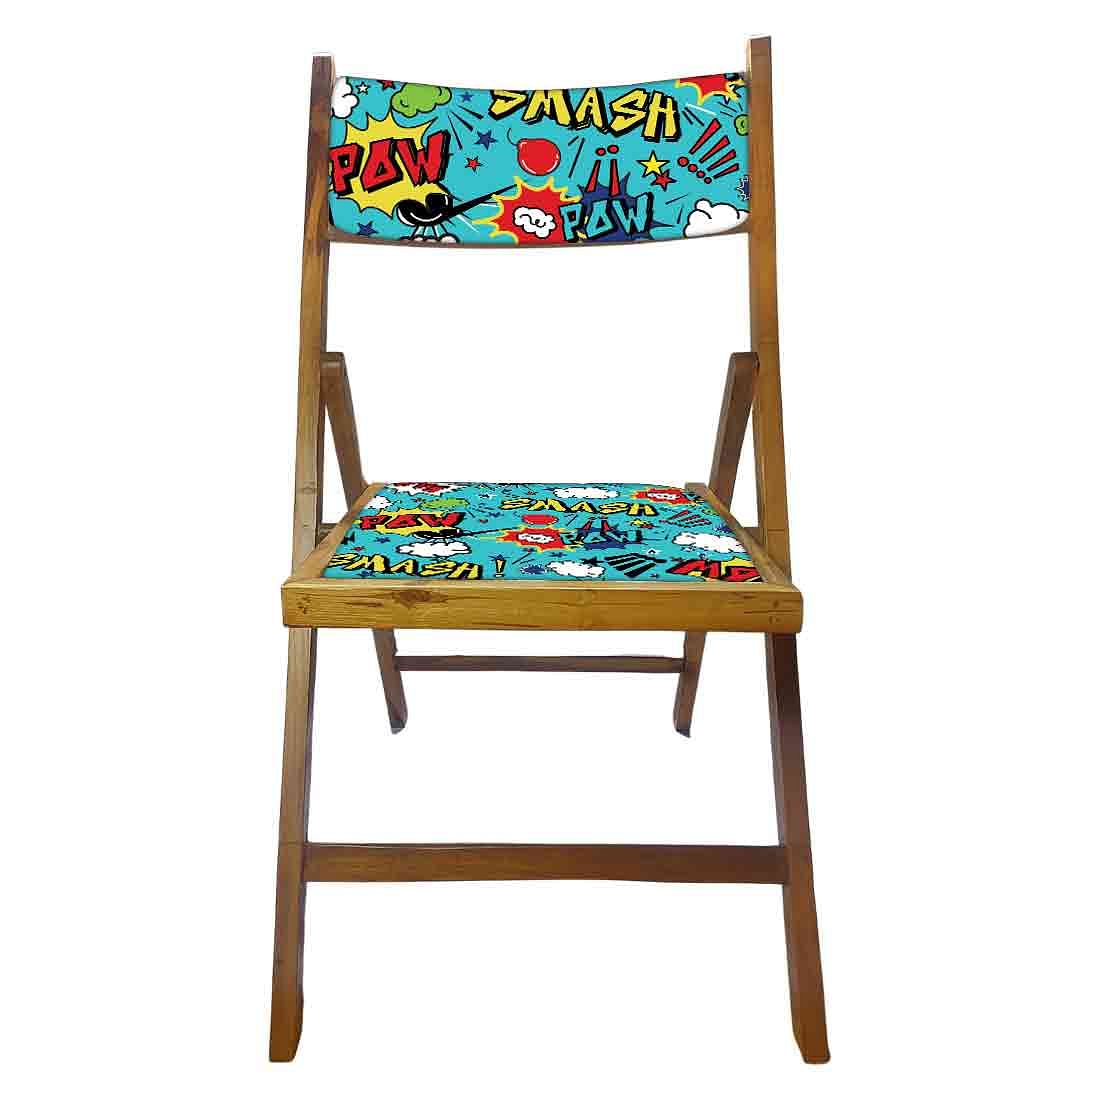 Nutcase Foldable Wooden Chairs With Cushion For Balcony  -  Smash Nutcase